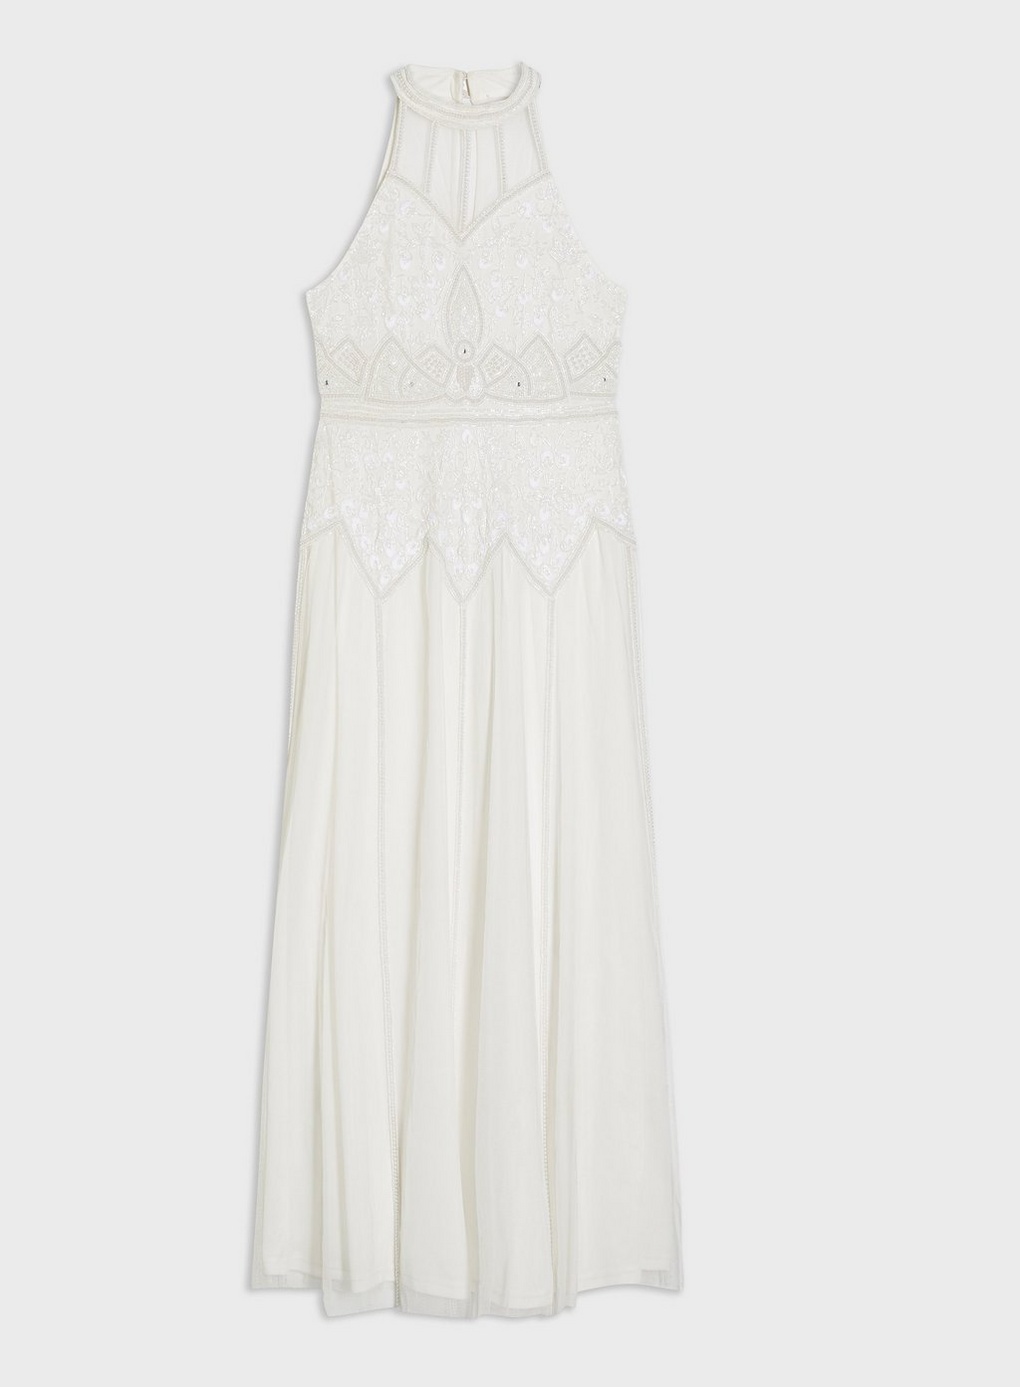 miss selfridge tiered maxi dress with lace detail in black